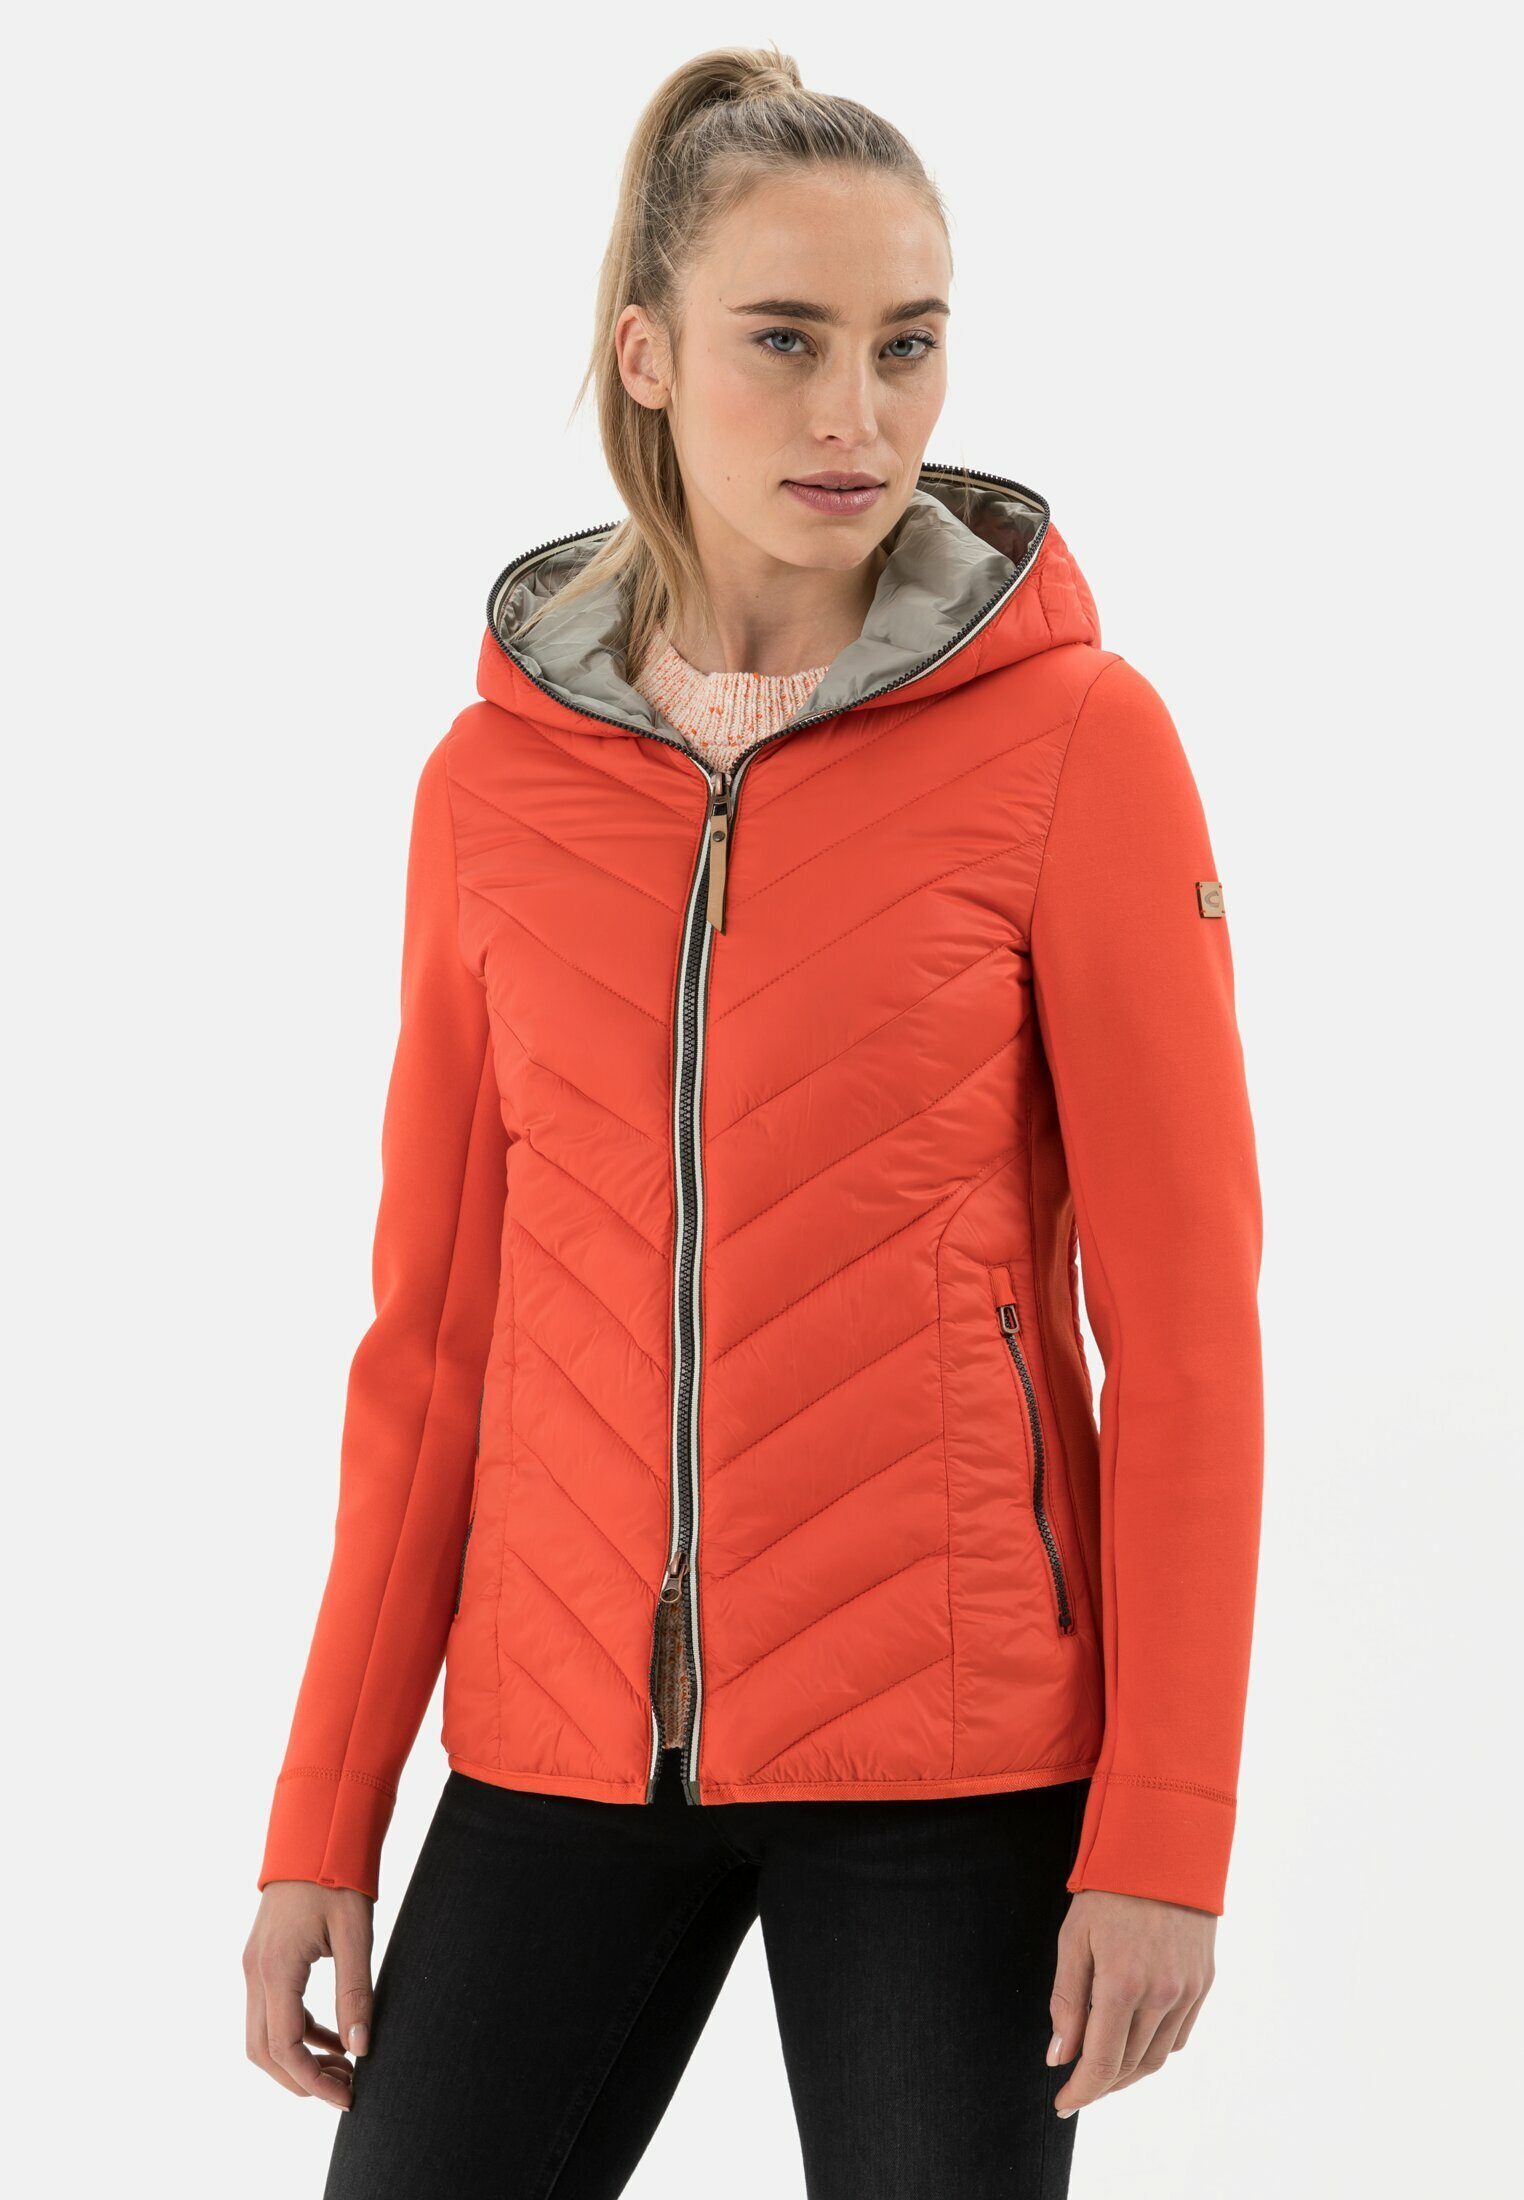 camel active aus Materialmix recyceltem Funktionsjacke Rot